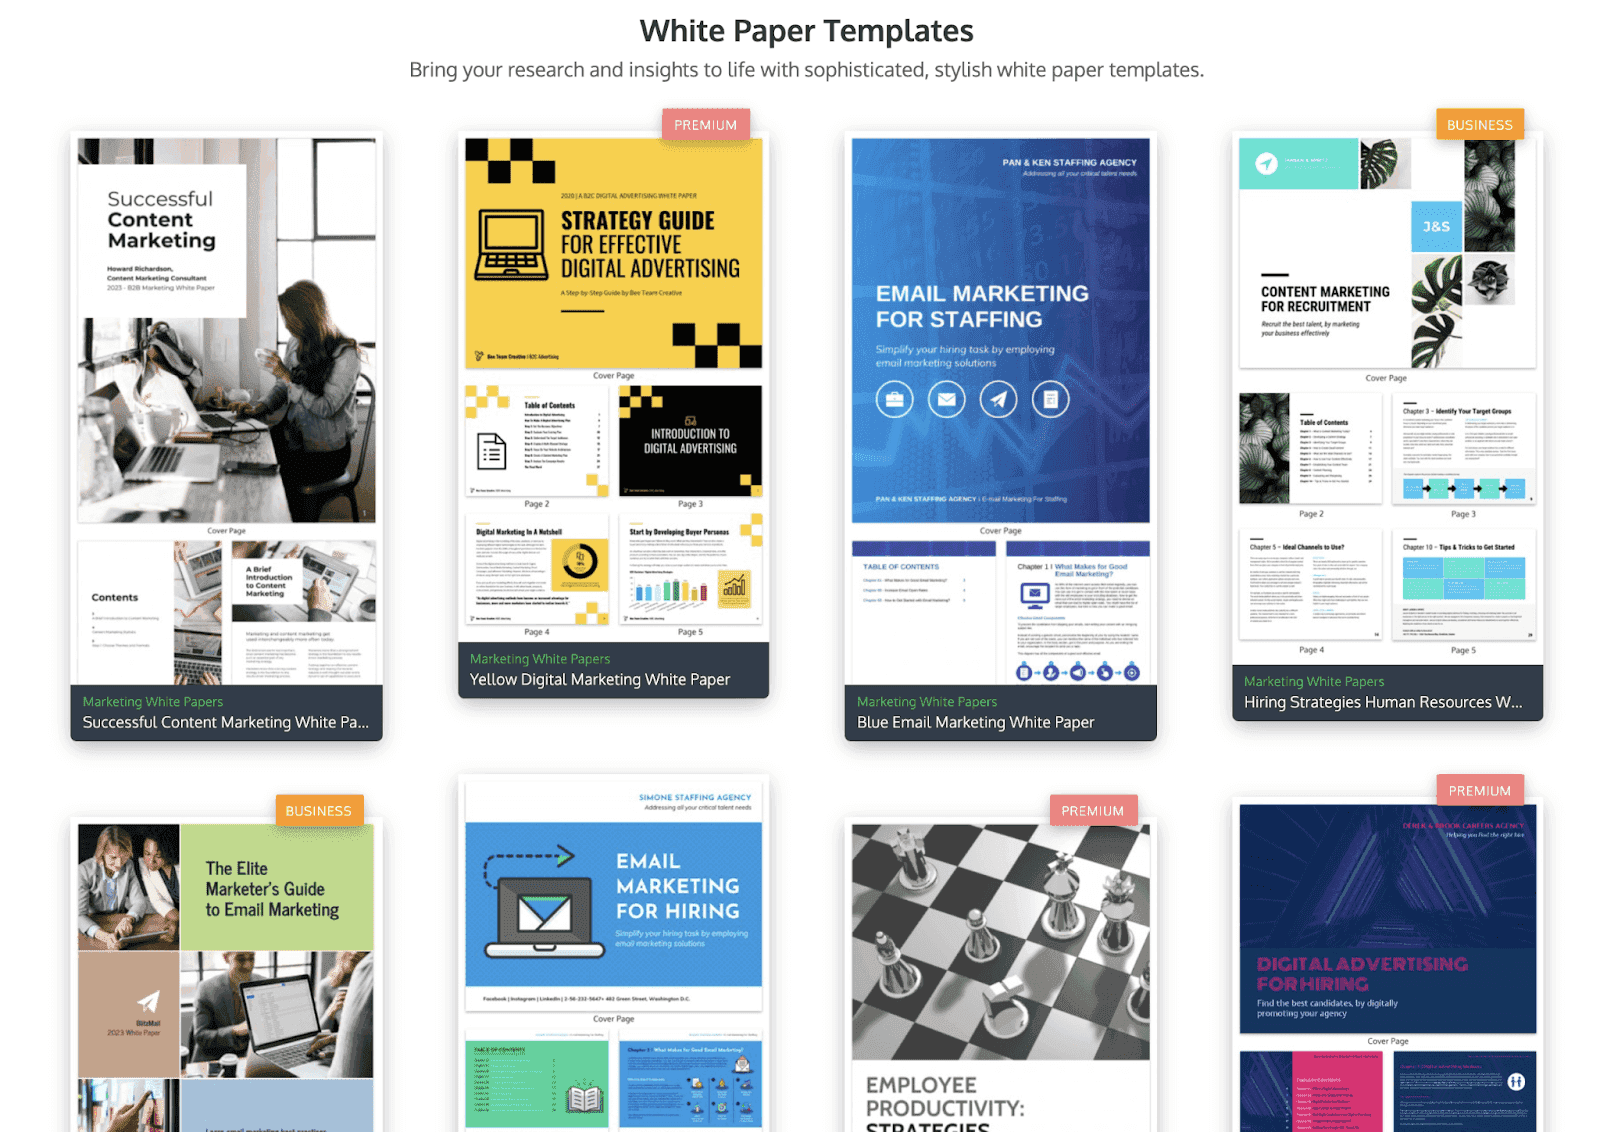 Online white paper templates